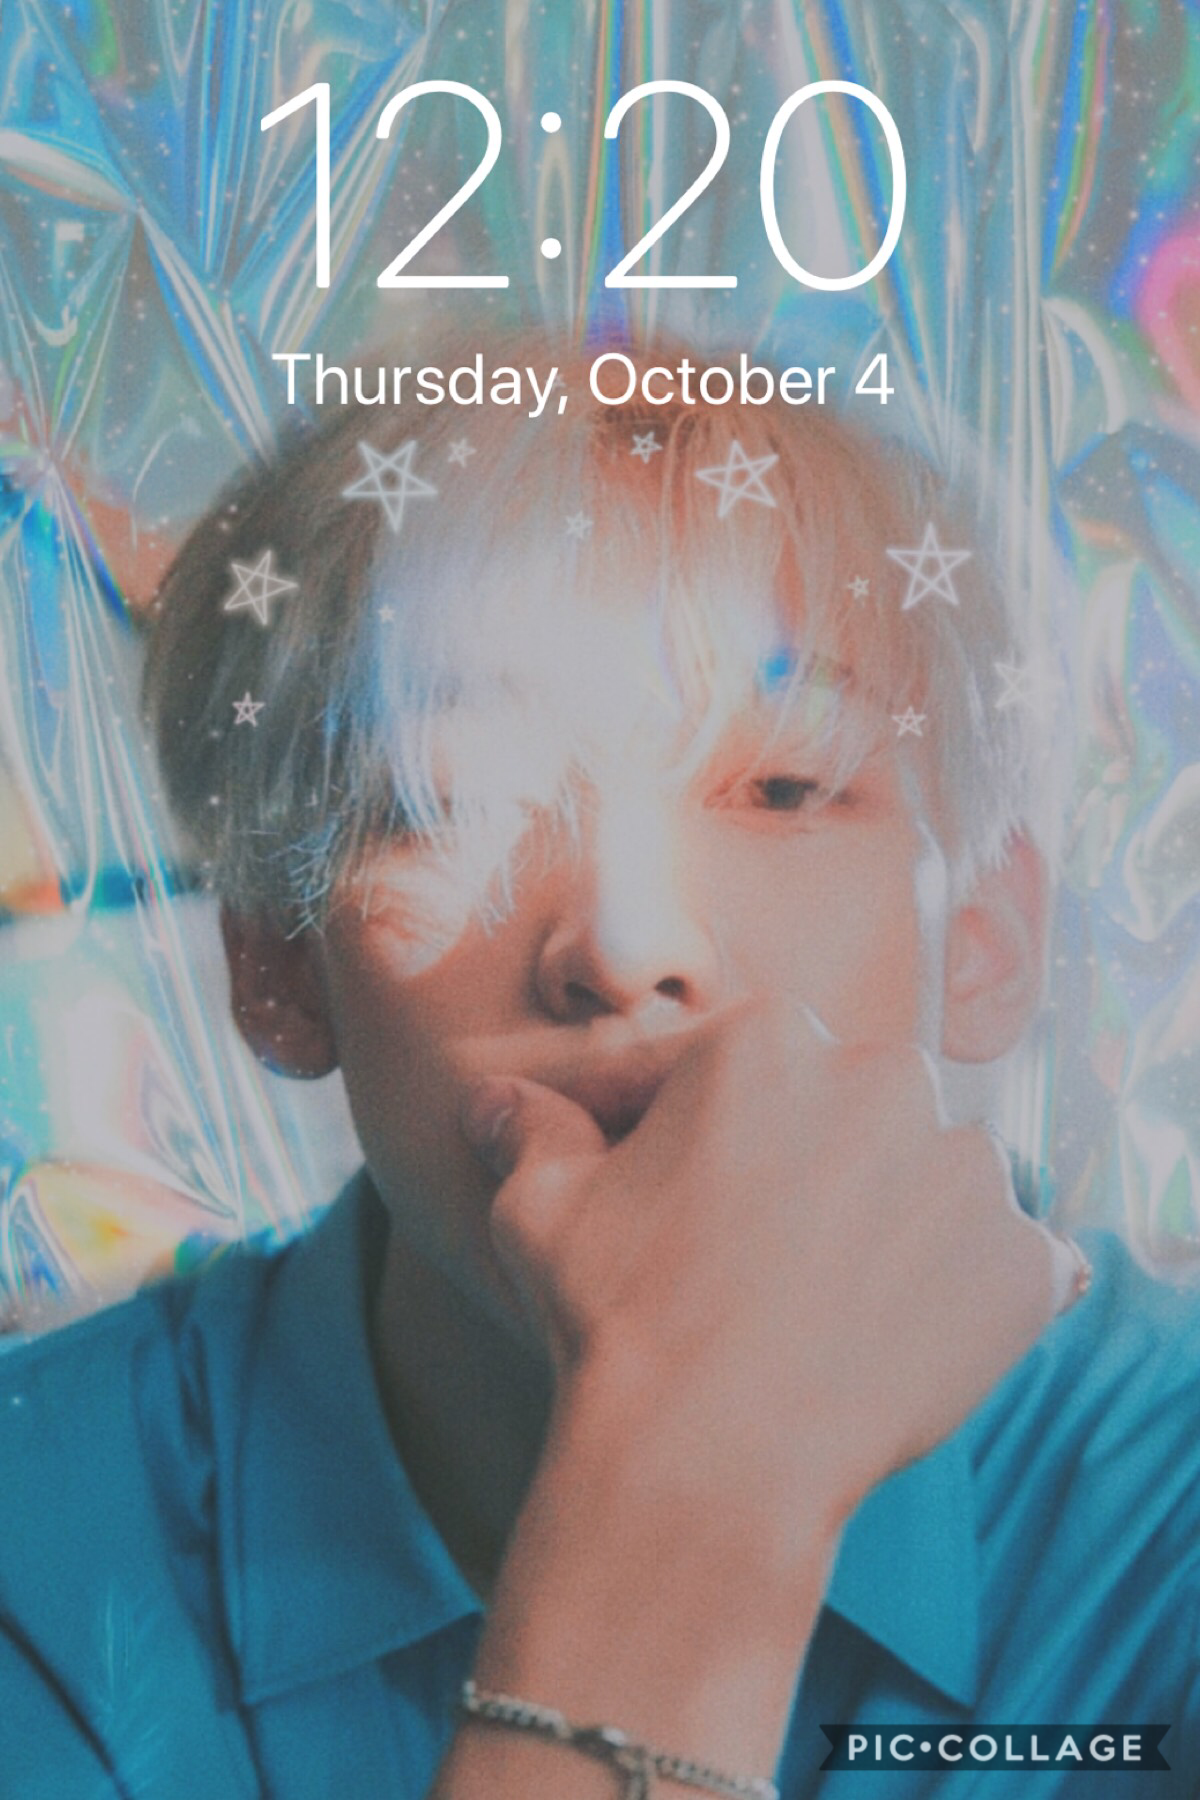 💙hey cuties it’s been a while, life just gets busier and crazy but I hope y’all are doing okay. I miss being on here, so I couldn’t find the original picture of this bambam edit, but I have it as my lock screen so yay!💙